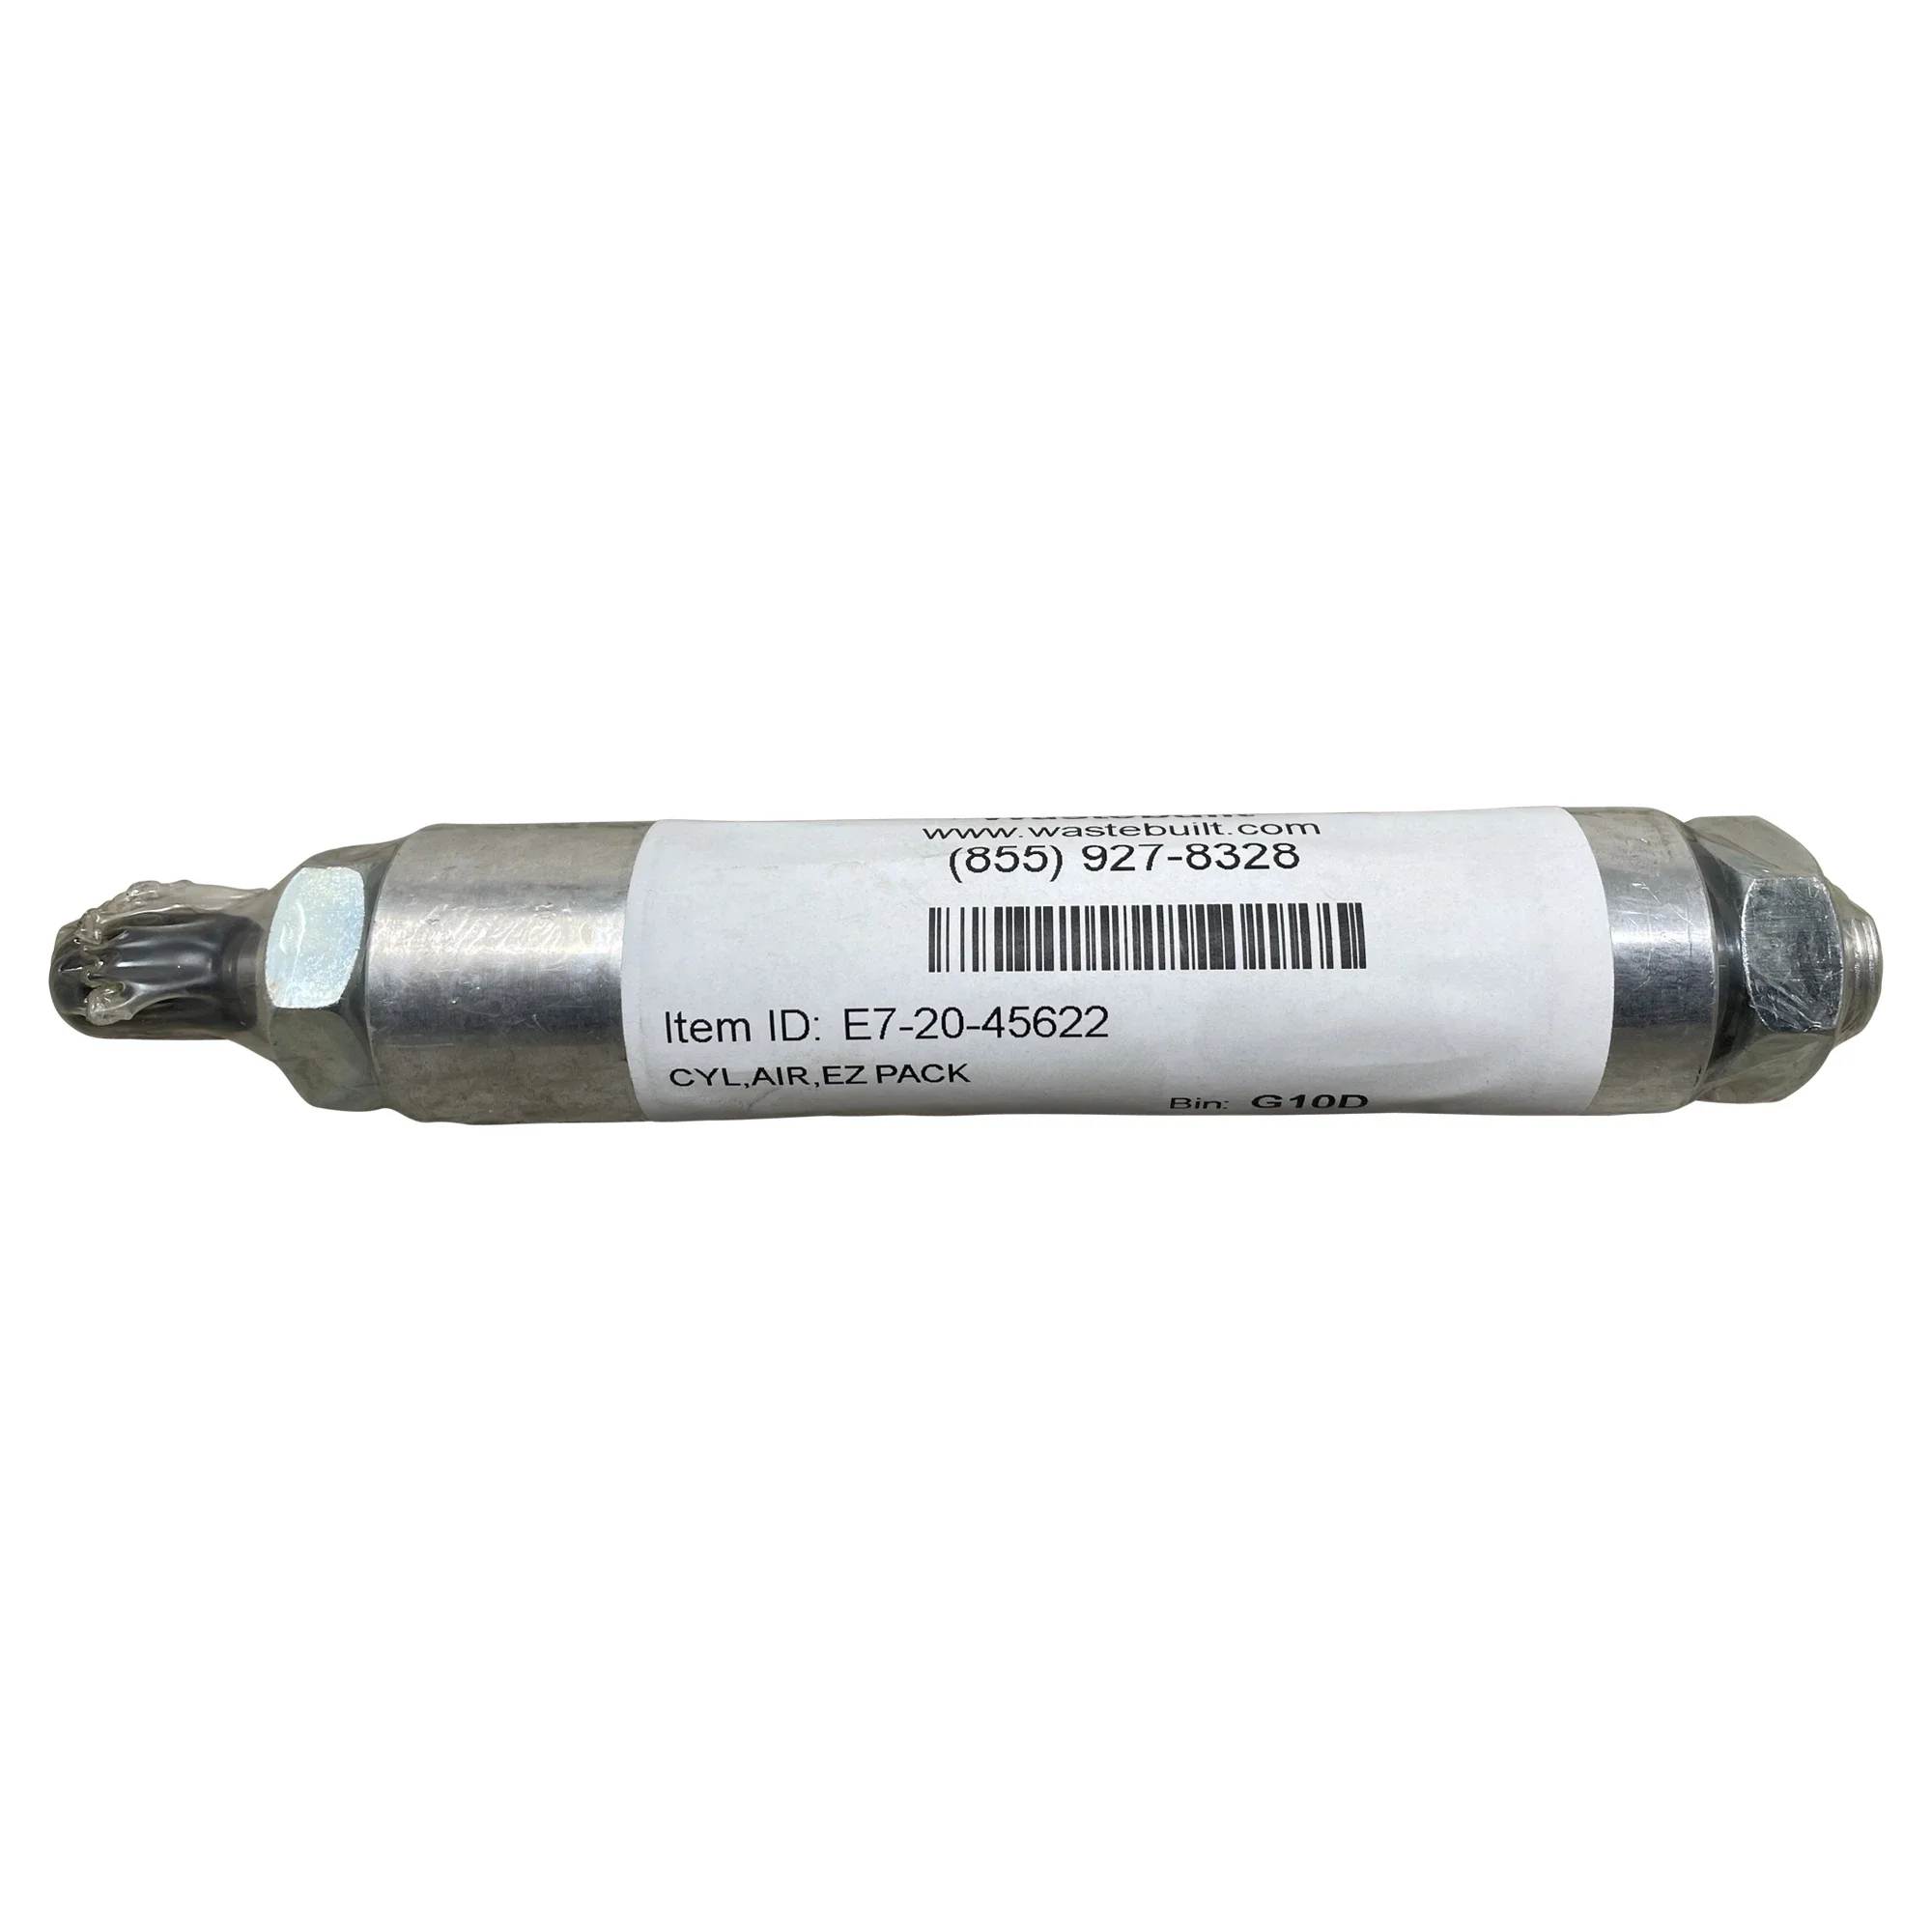 Wastebuilt® Replacement for E-Z Pack Air Cylinder E7-20-45622